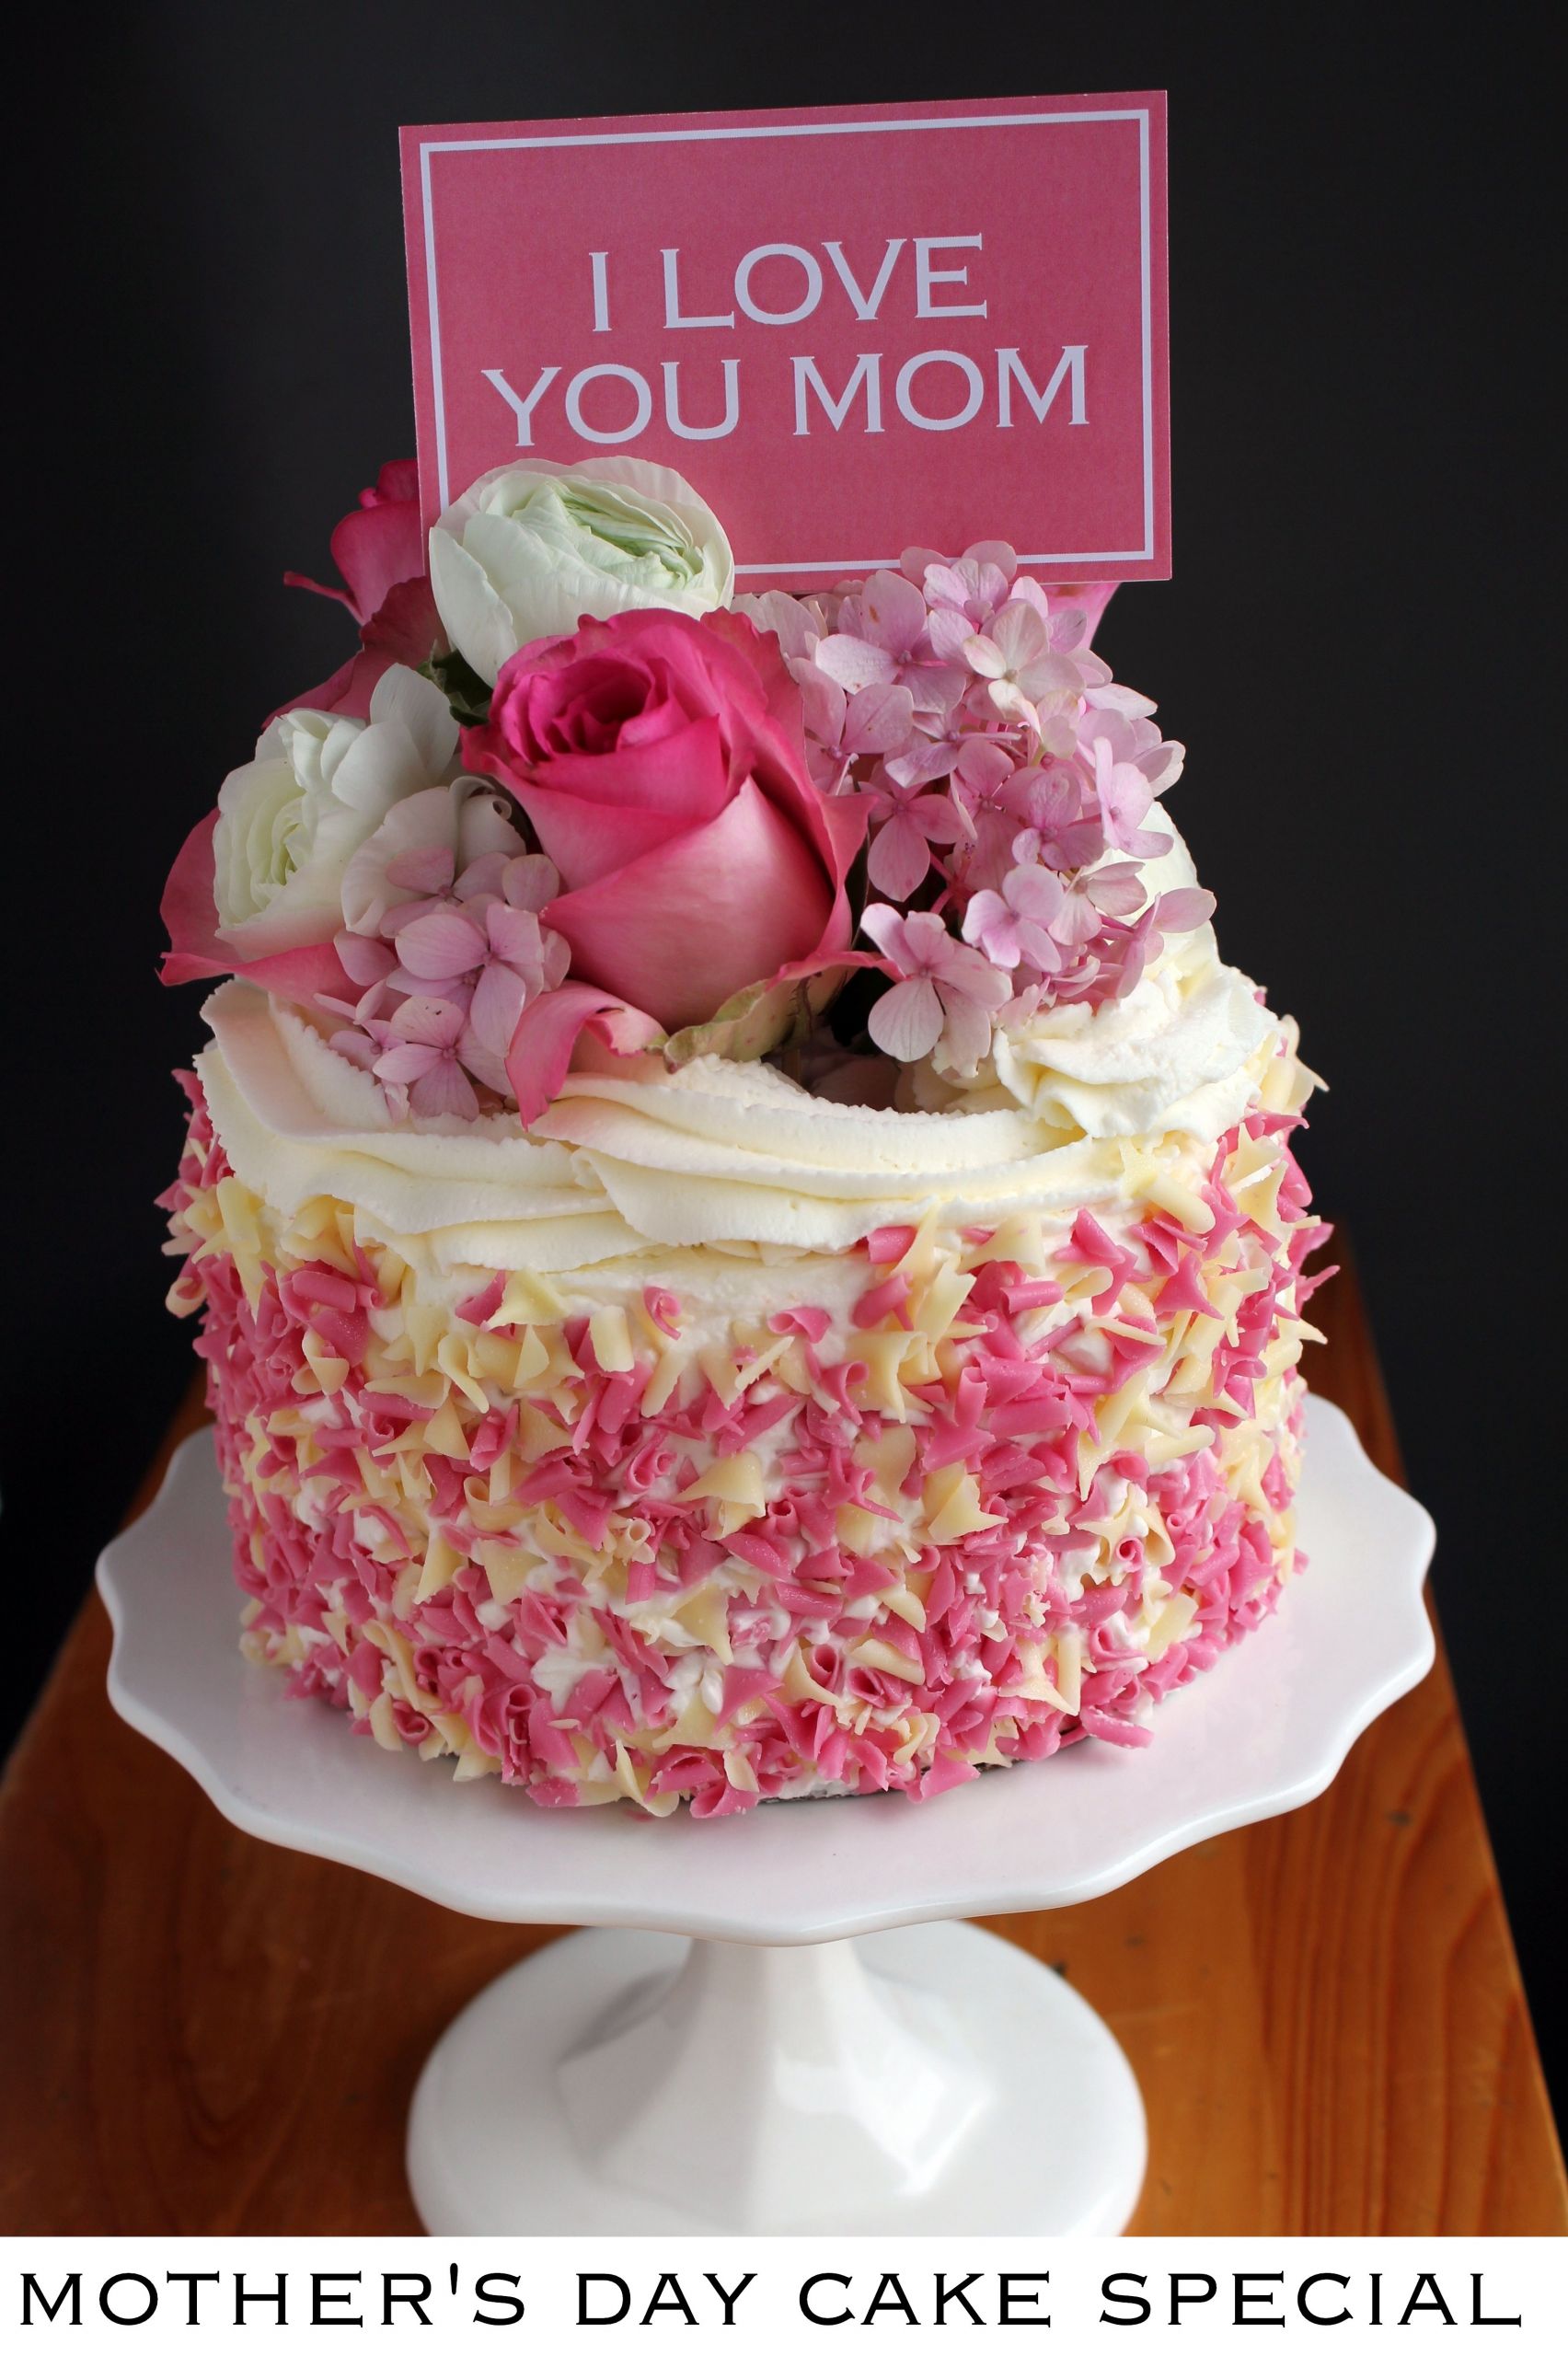 Birthday Cake Ideas For Mom
 A Baker’s Dozen of Ways to Say “I Love You” to Mom